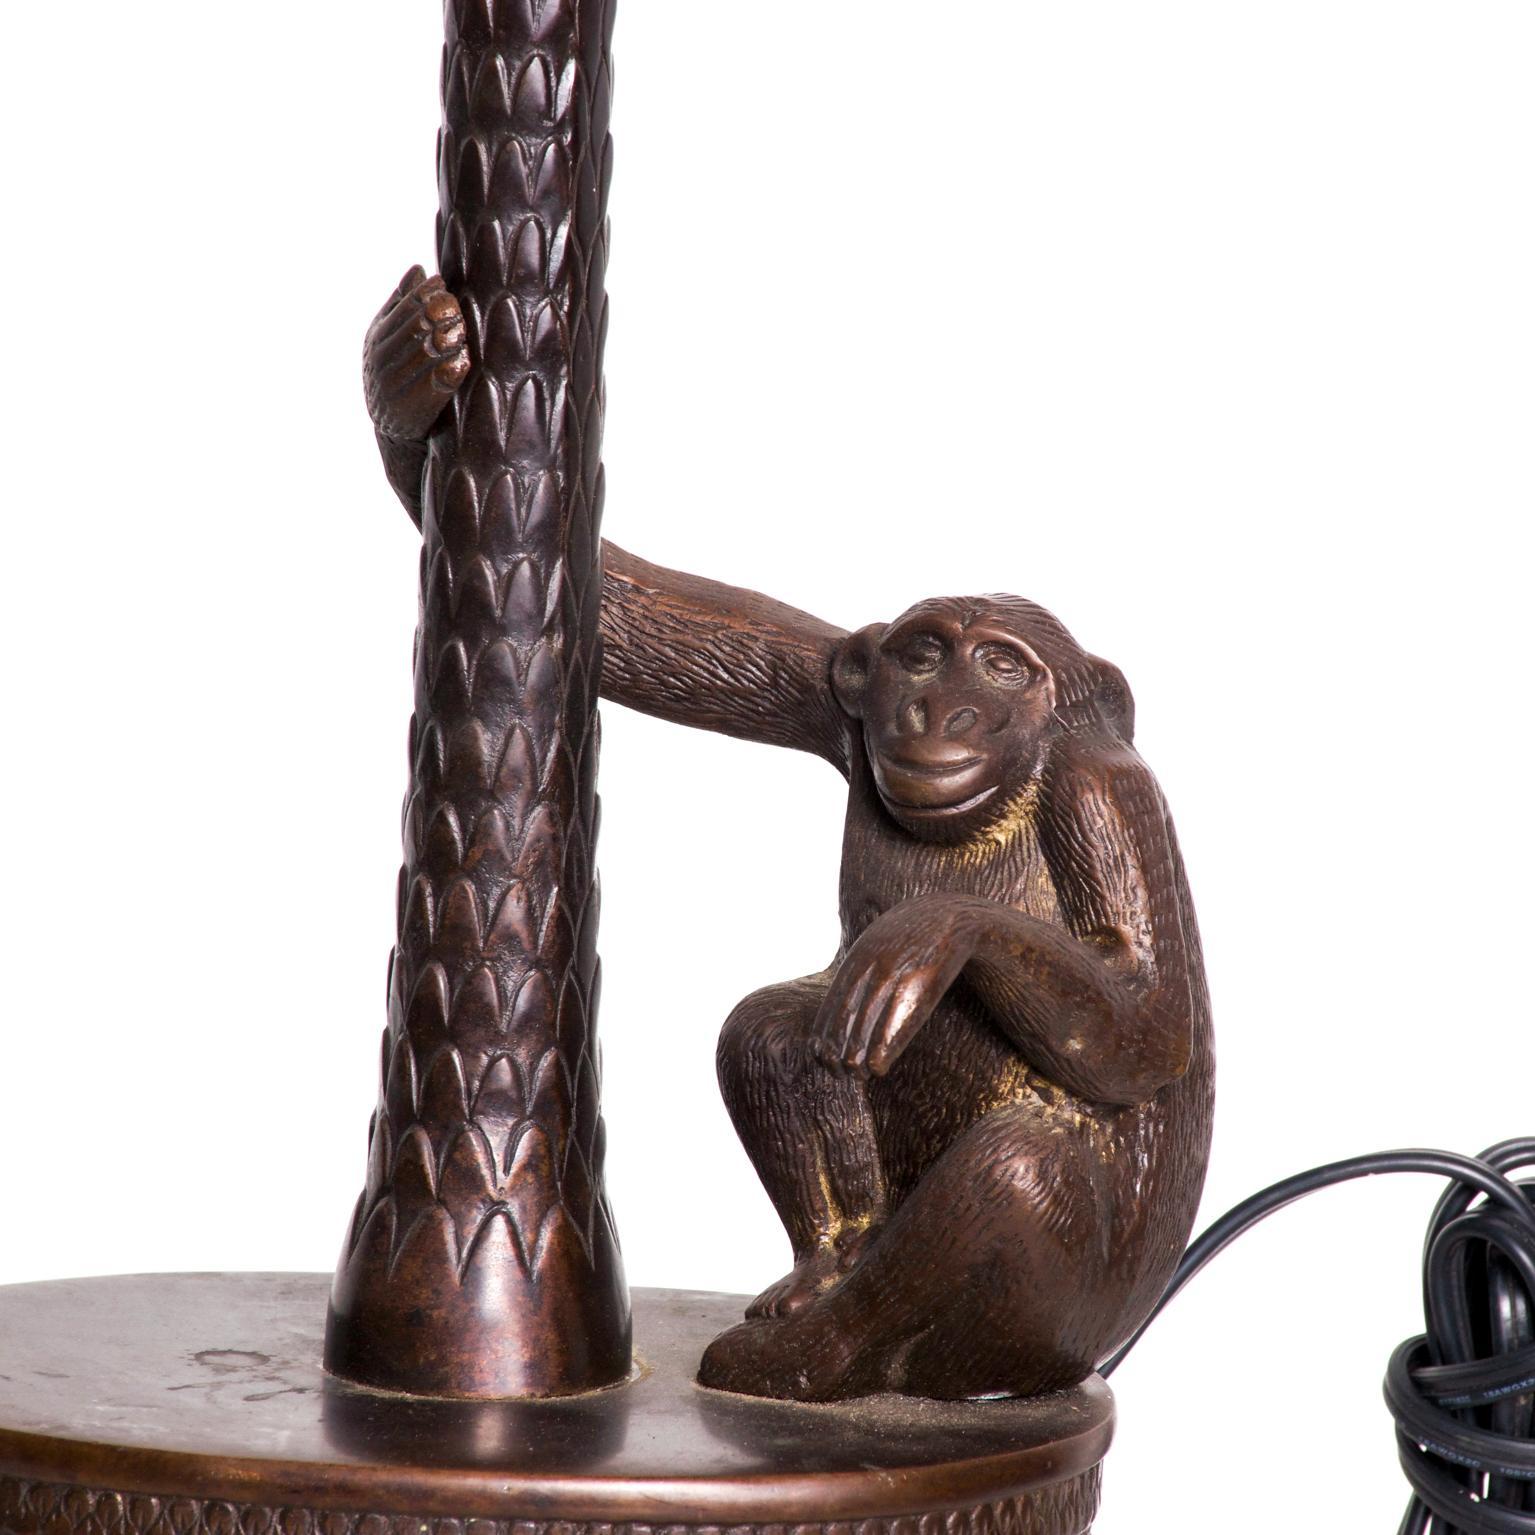 For your pleasure: An elegant and adorable Bronze Monkey Palm Tree Table Lamp by Maitland Smith Dimensions are: 22